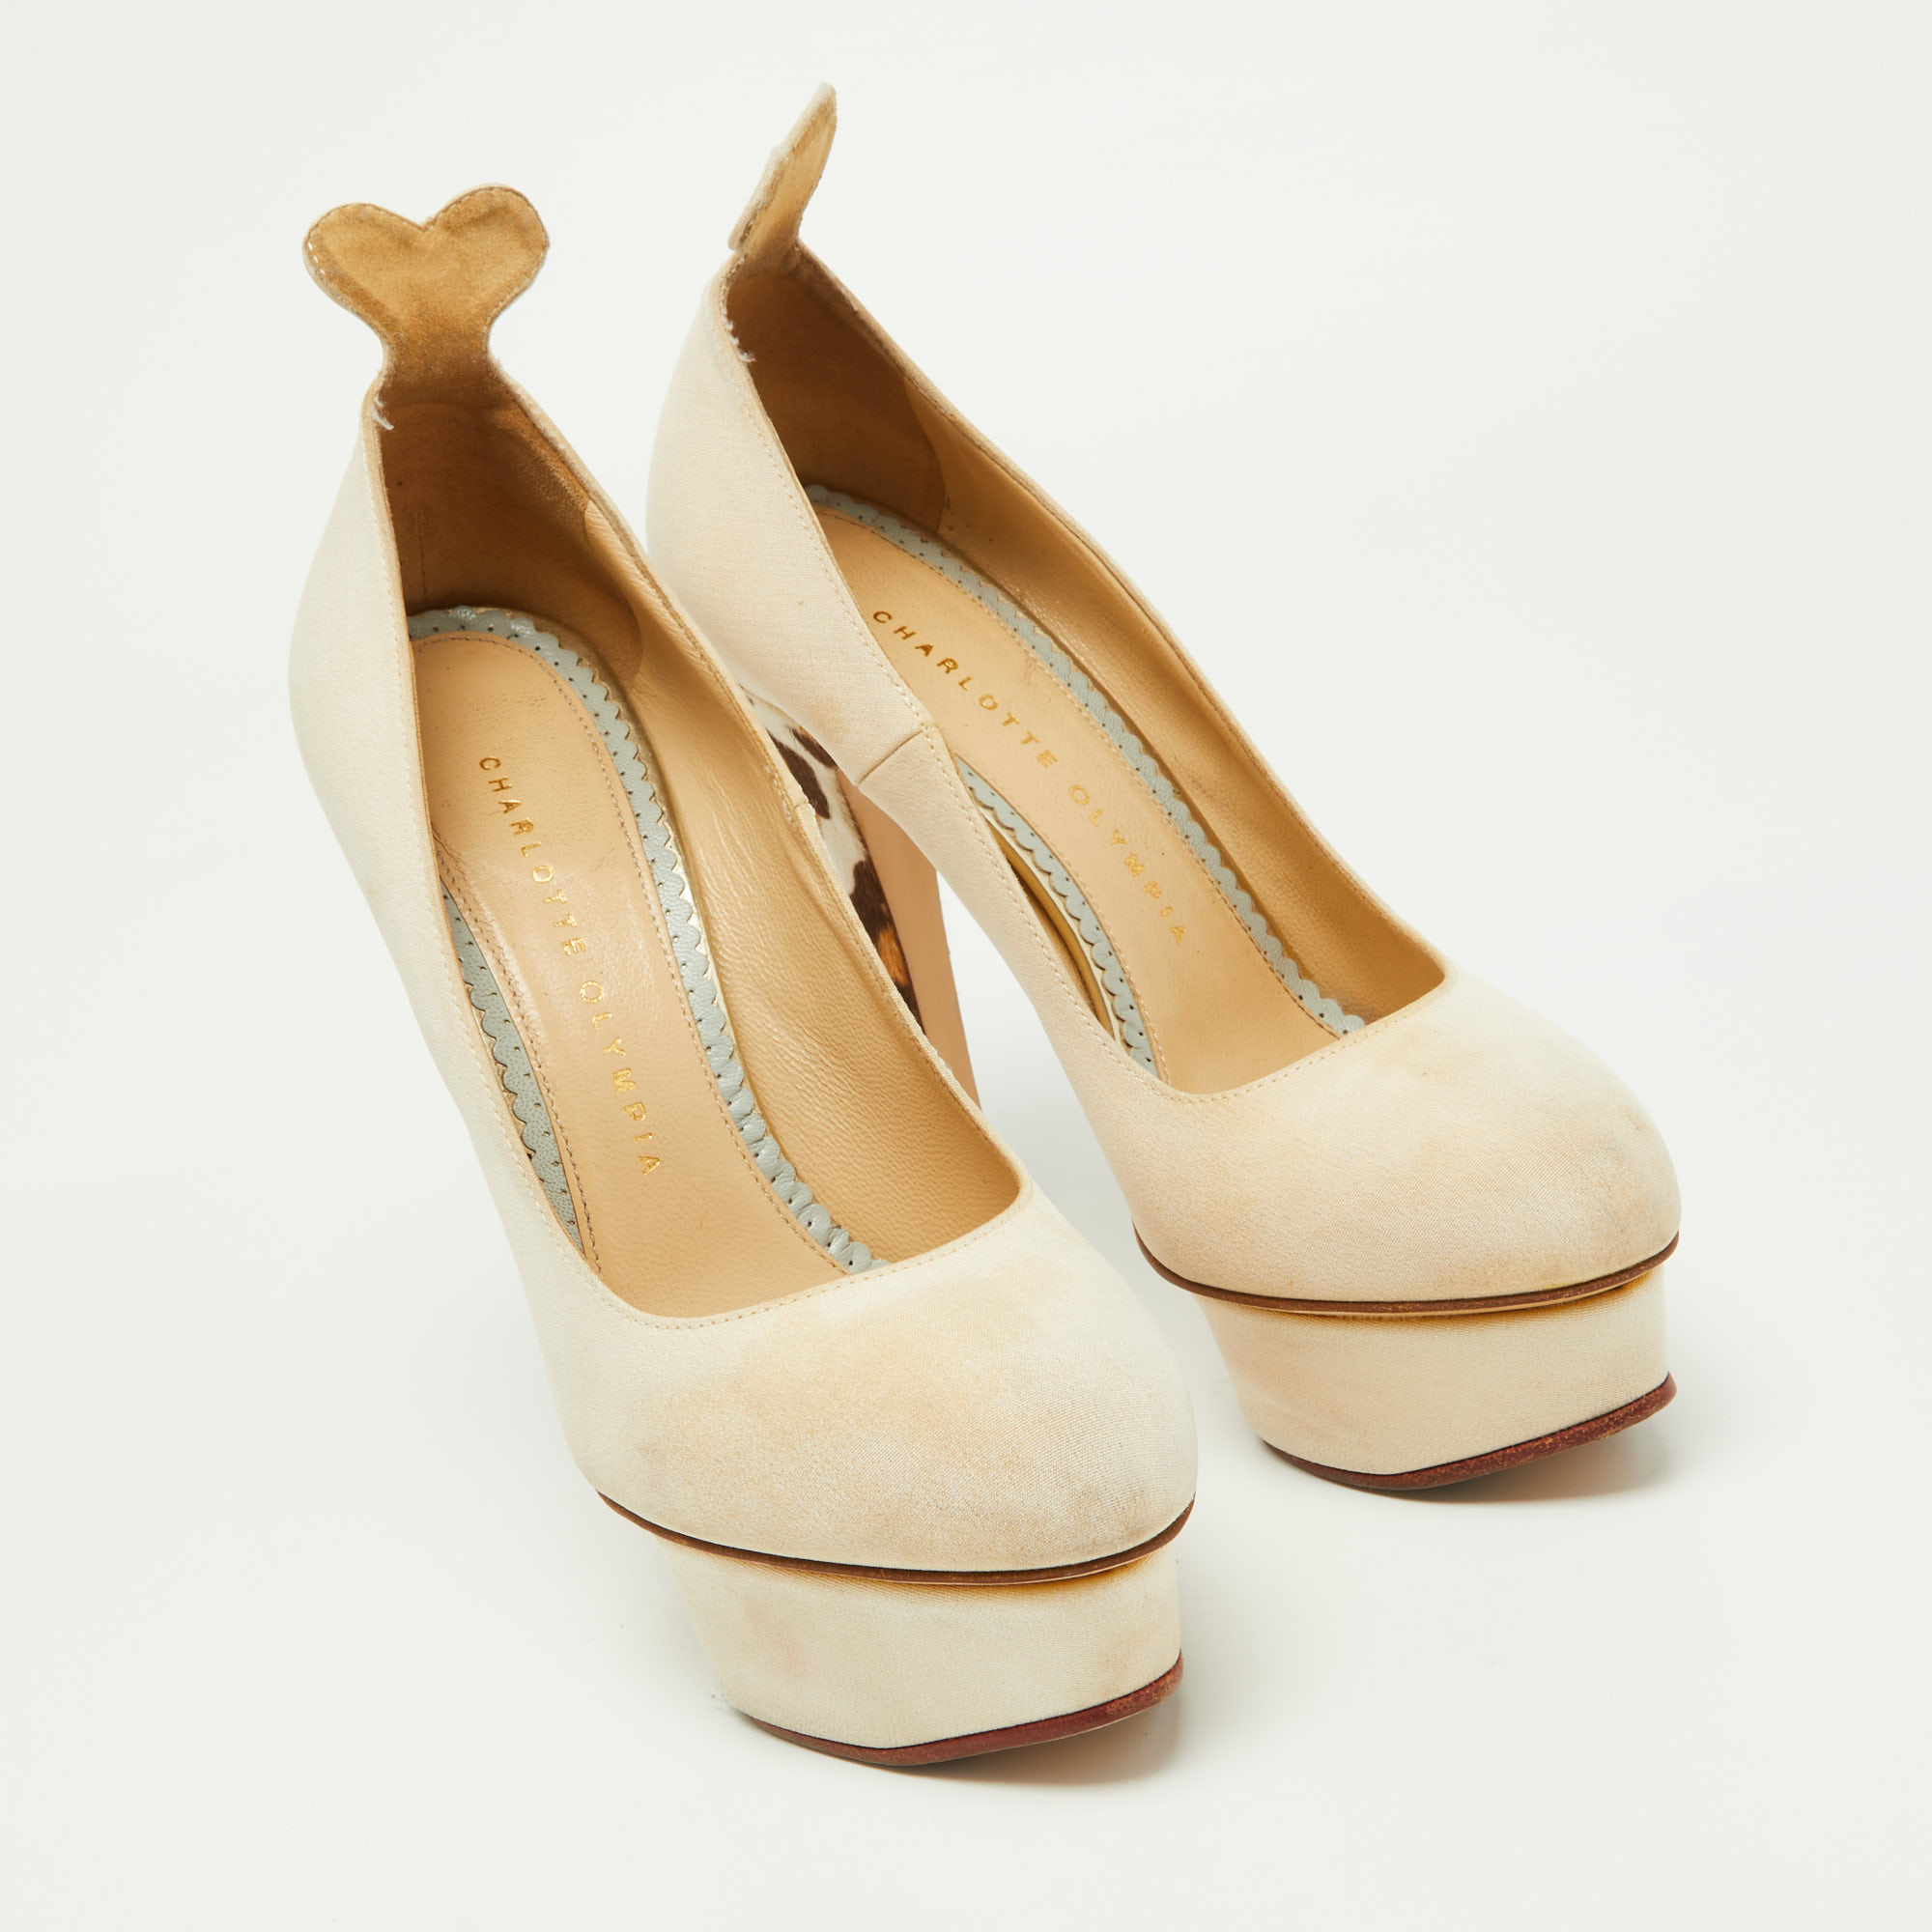 Charlotte Olympia Beige Fabric And Calfhair Dolly Platform Pumps Size 37.5